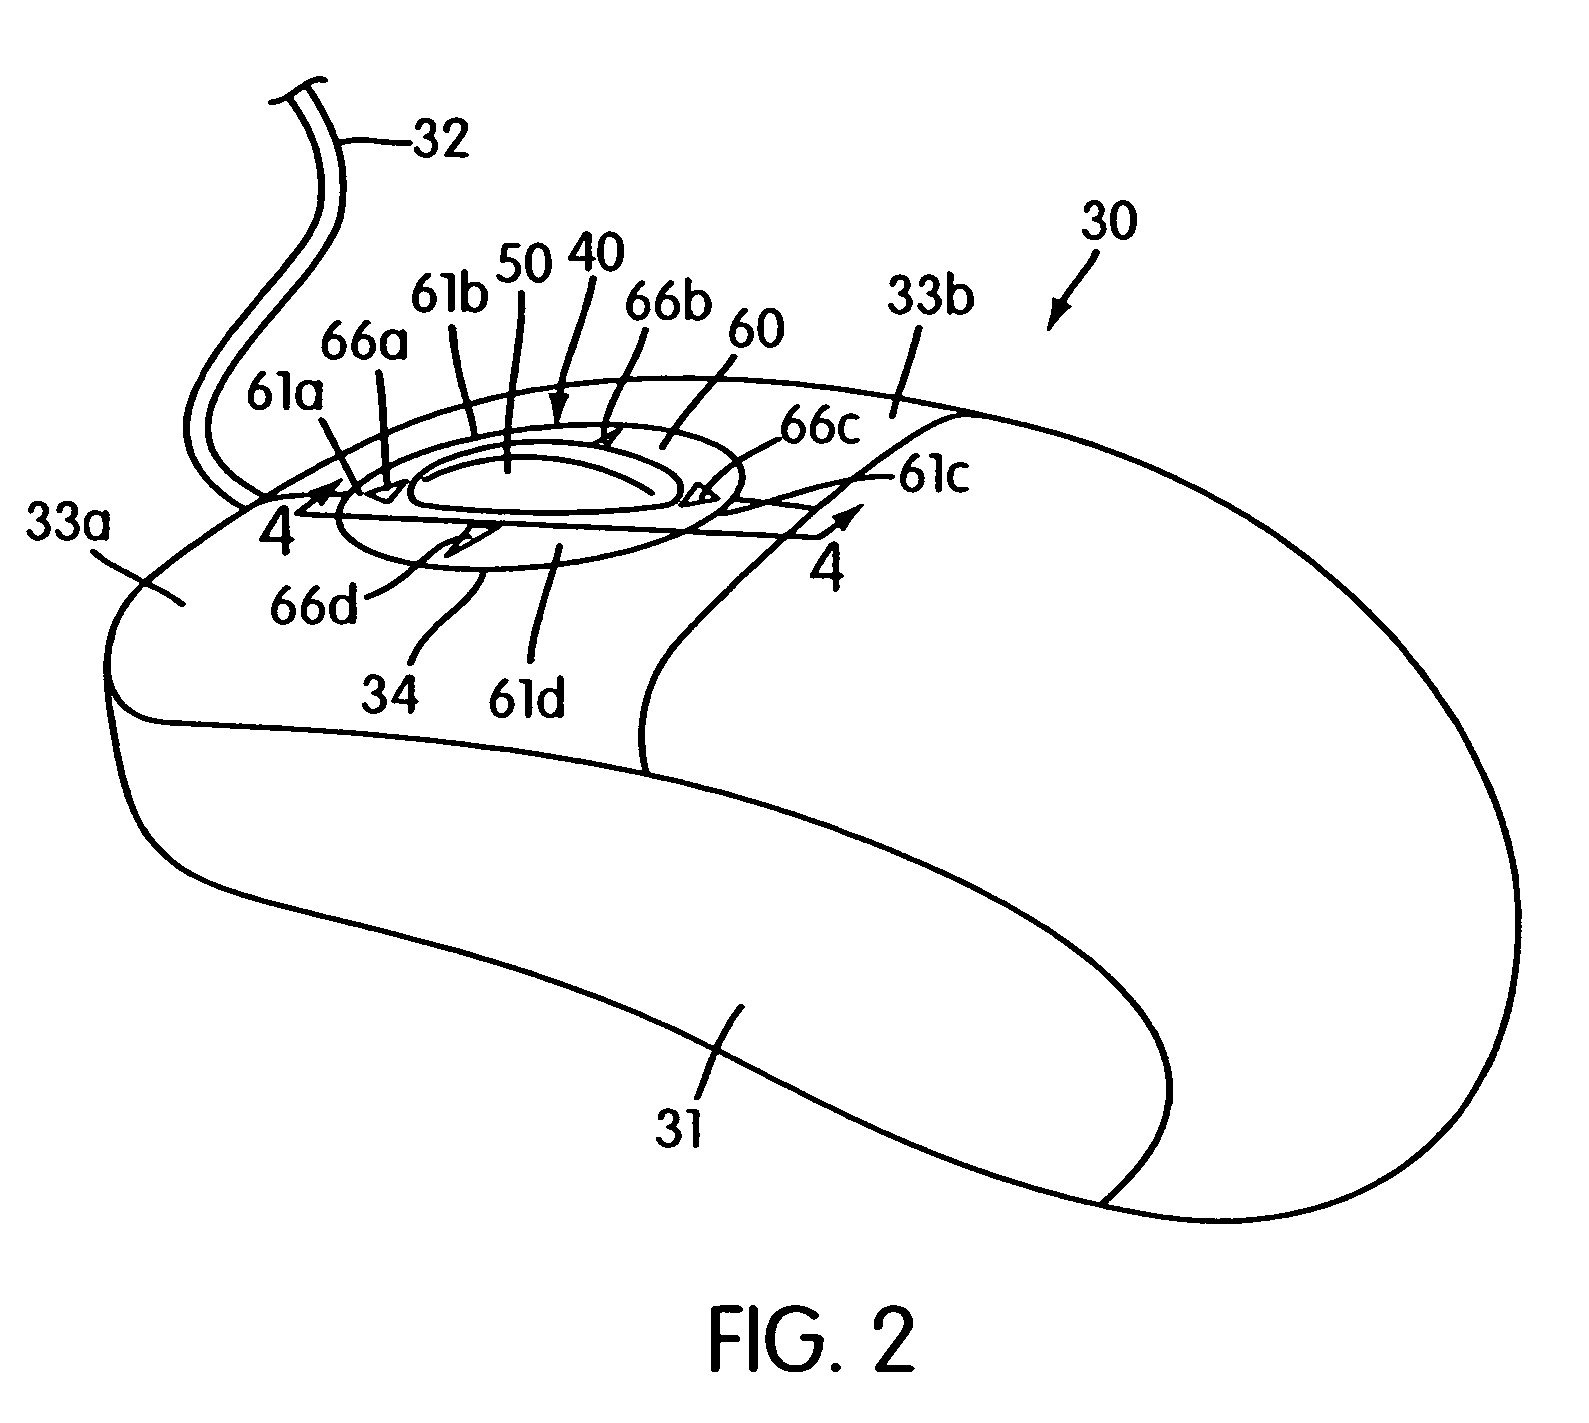 Scrolling apparatus providing multi-directional movement of an image